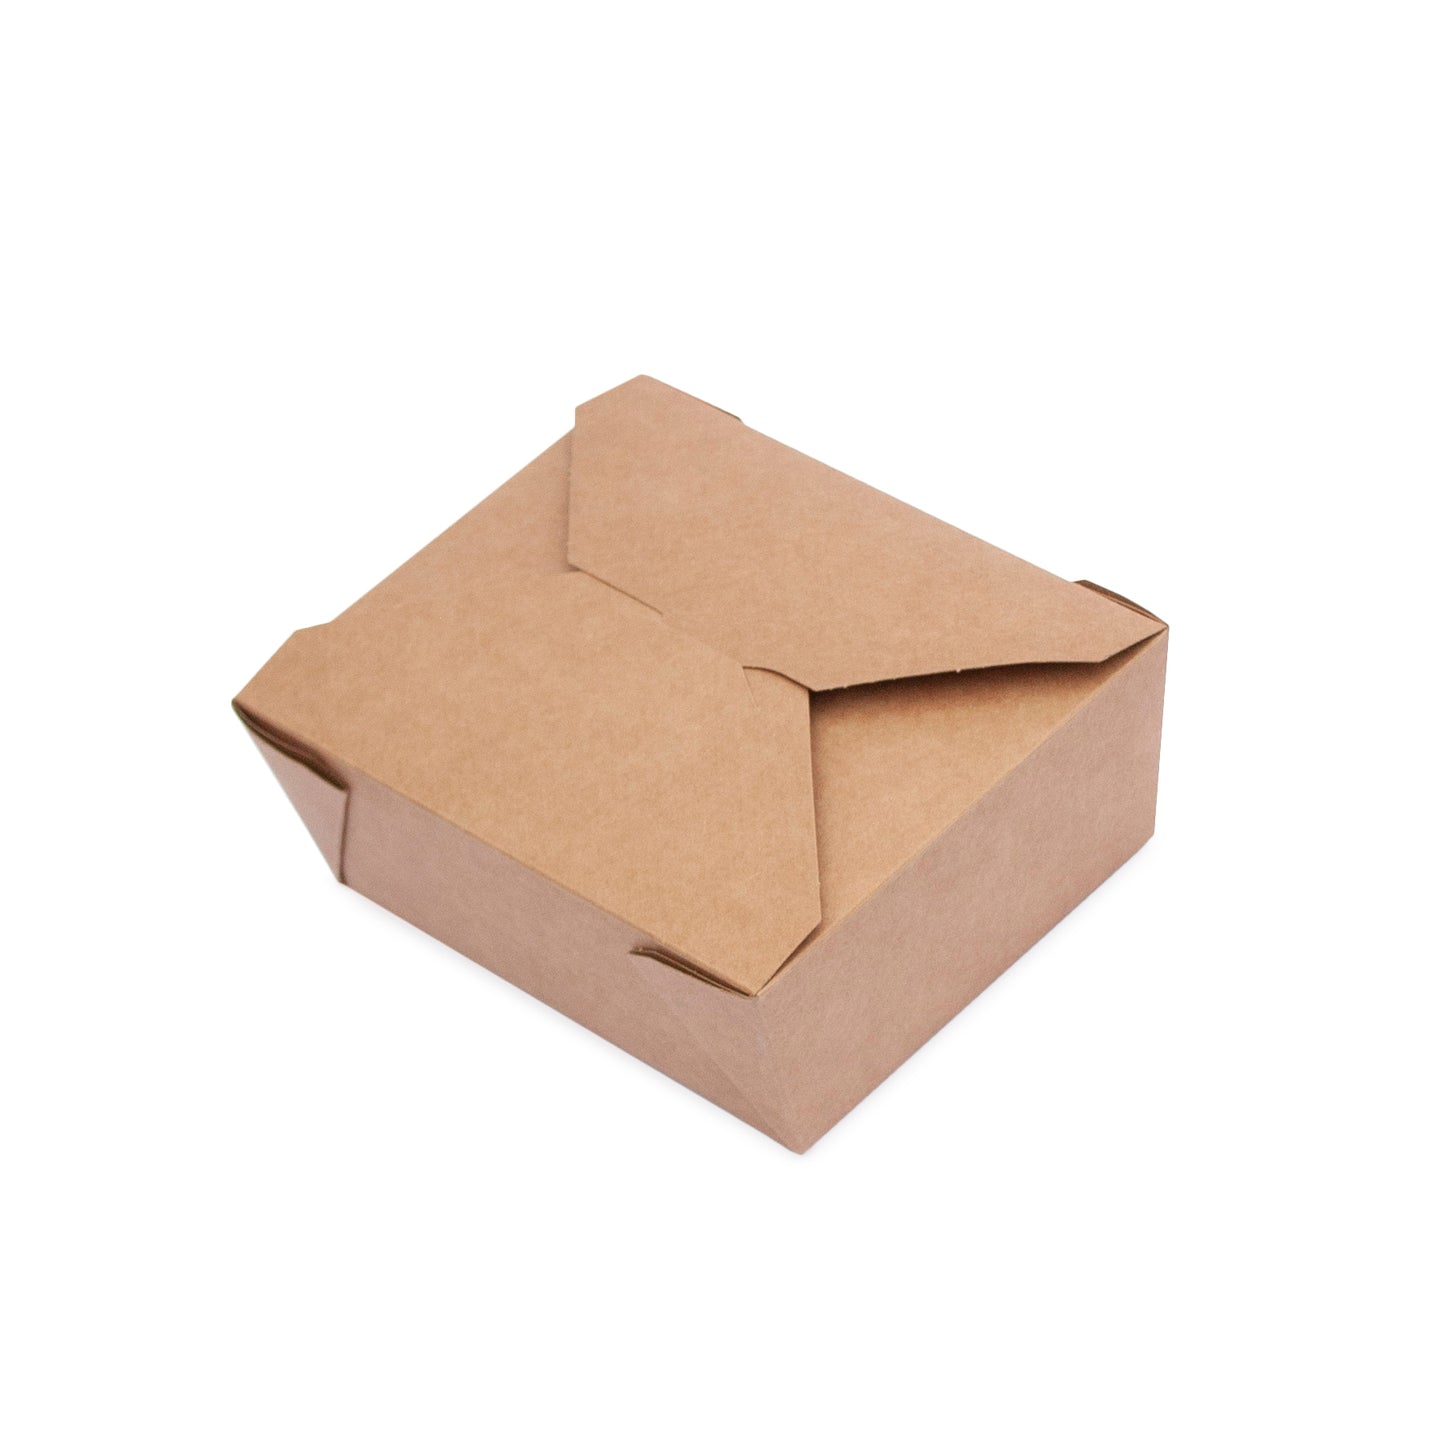 Leakproof food container No.2 kraft food-to-go carton 280 units, 1500ml (19.5 x 14 x 5cm)